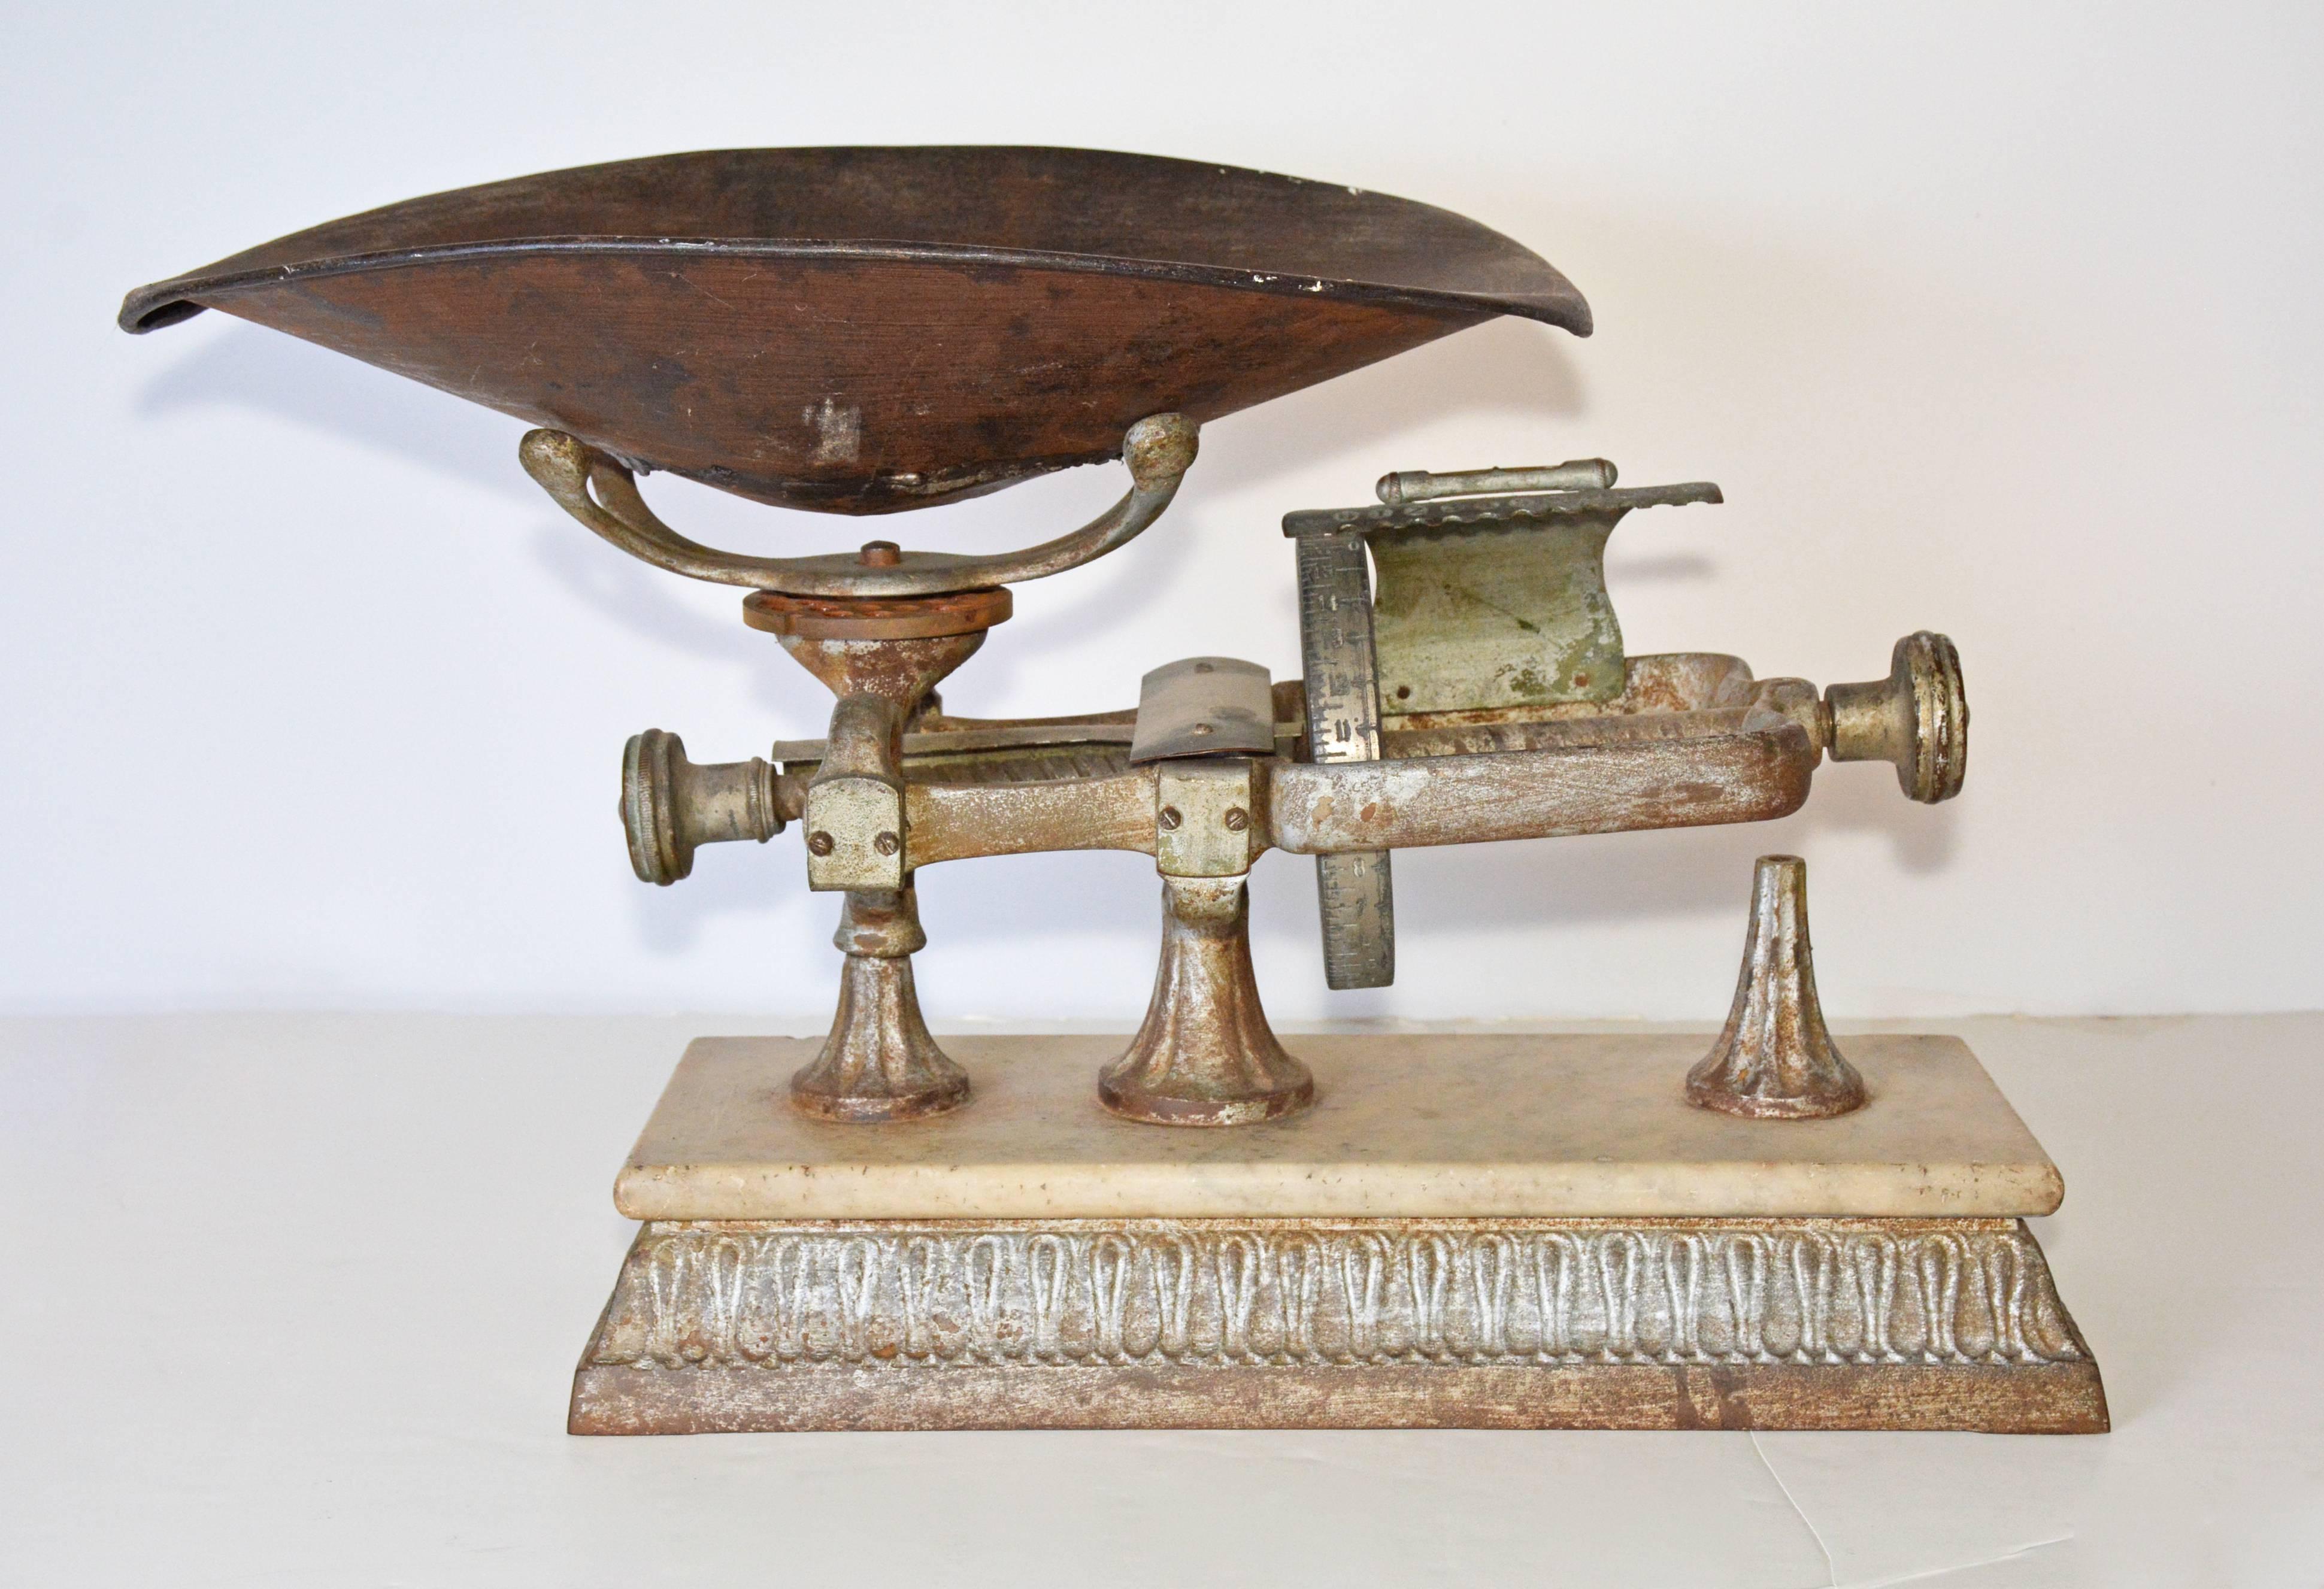 The label on the antique scale reads 